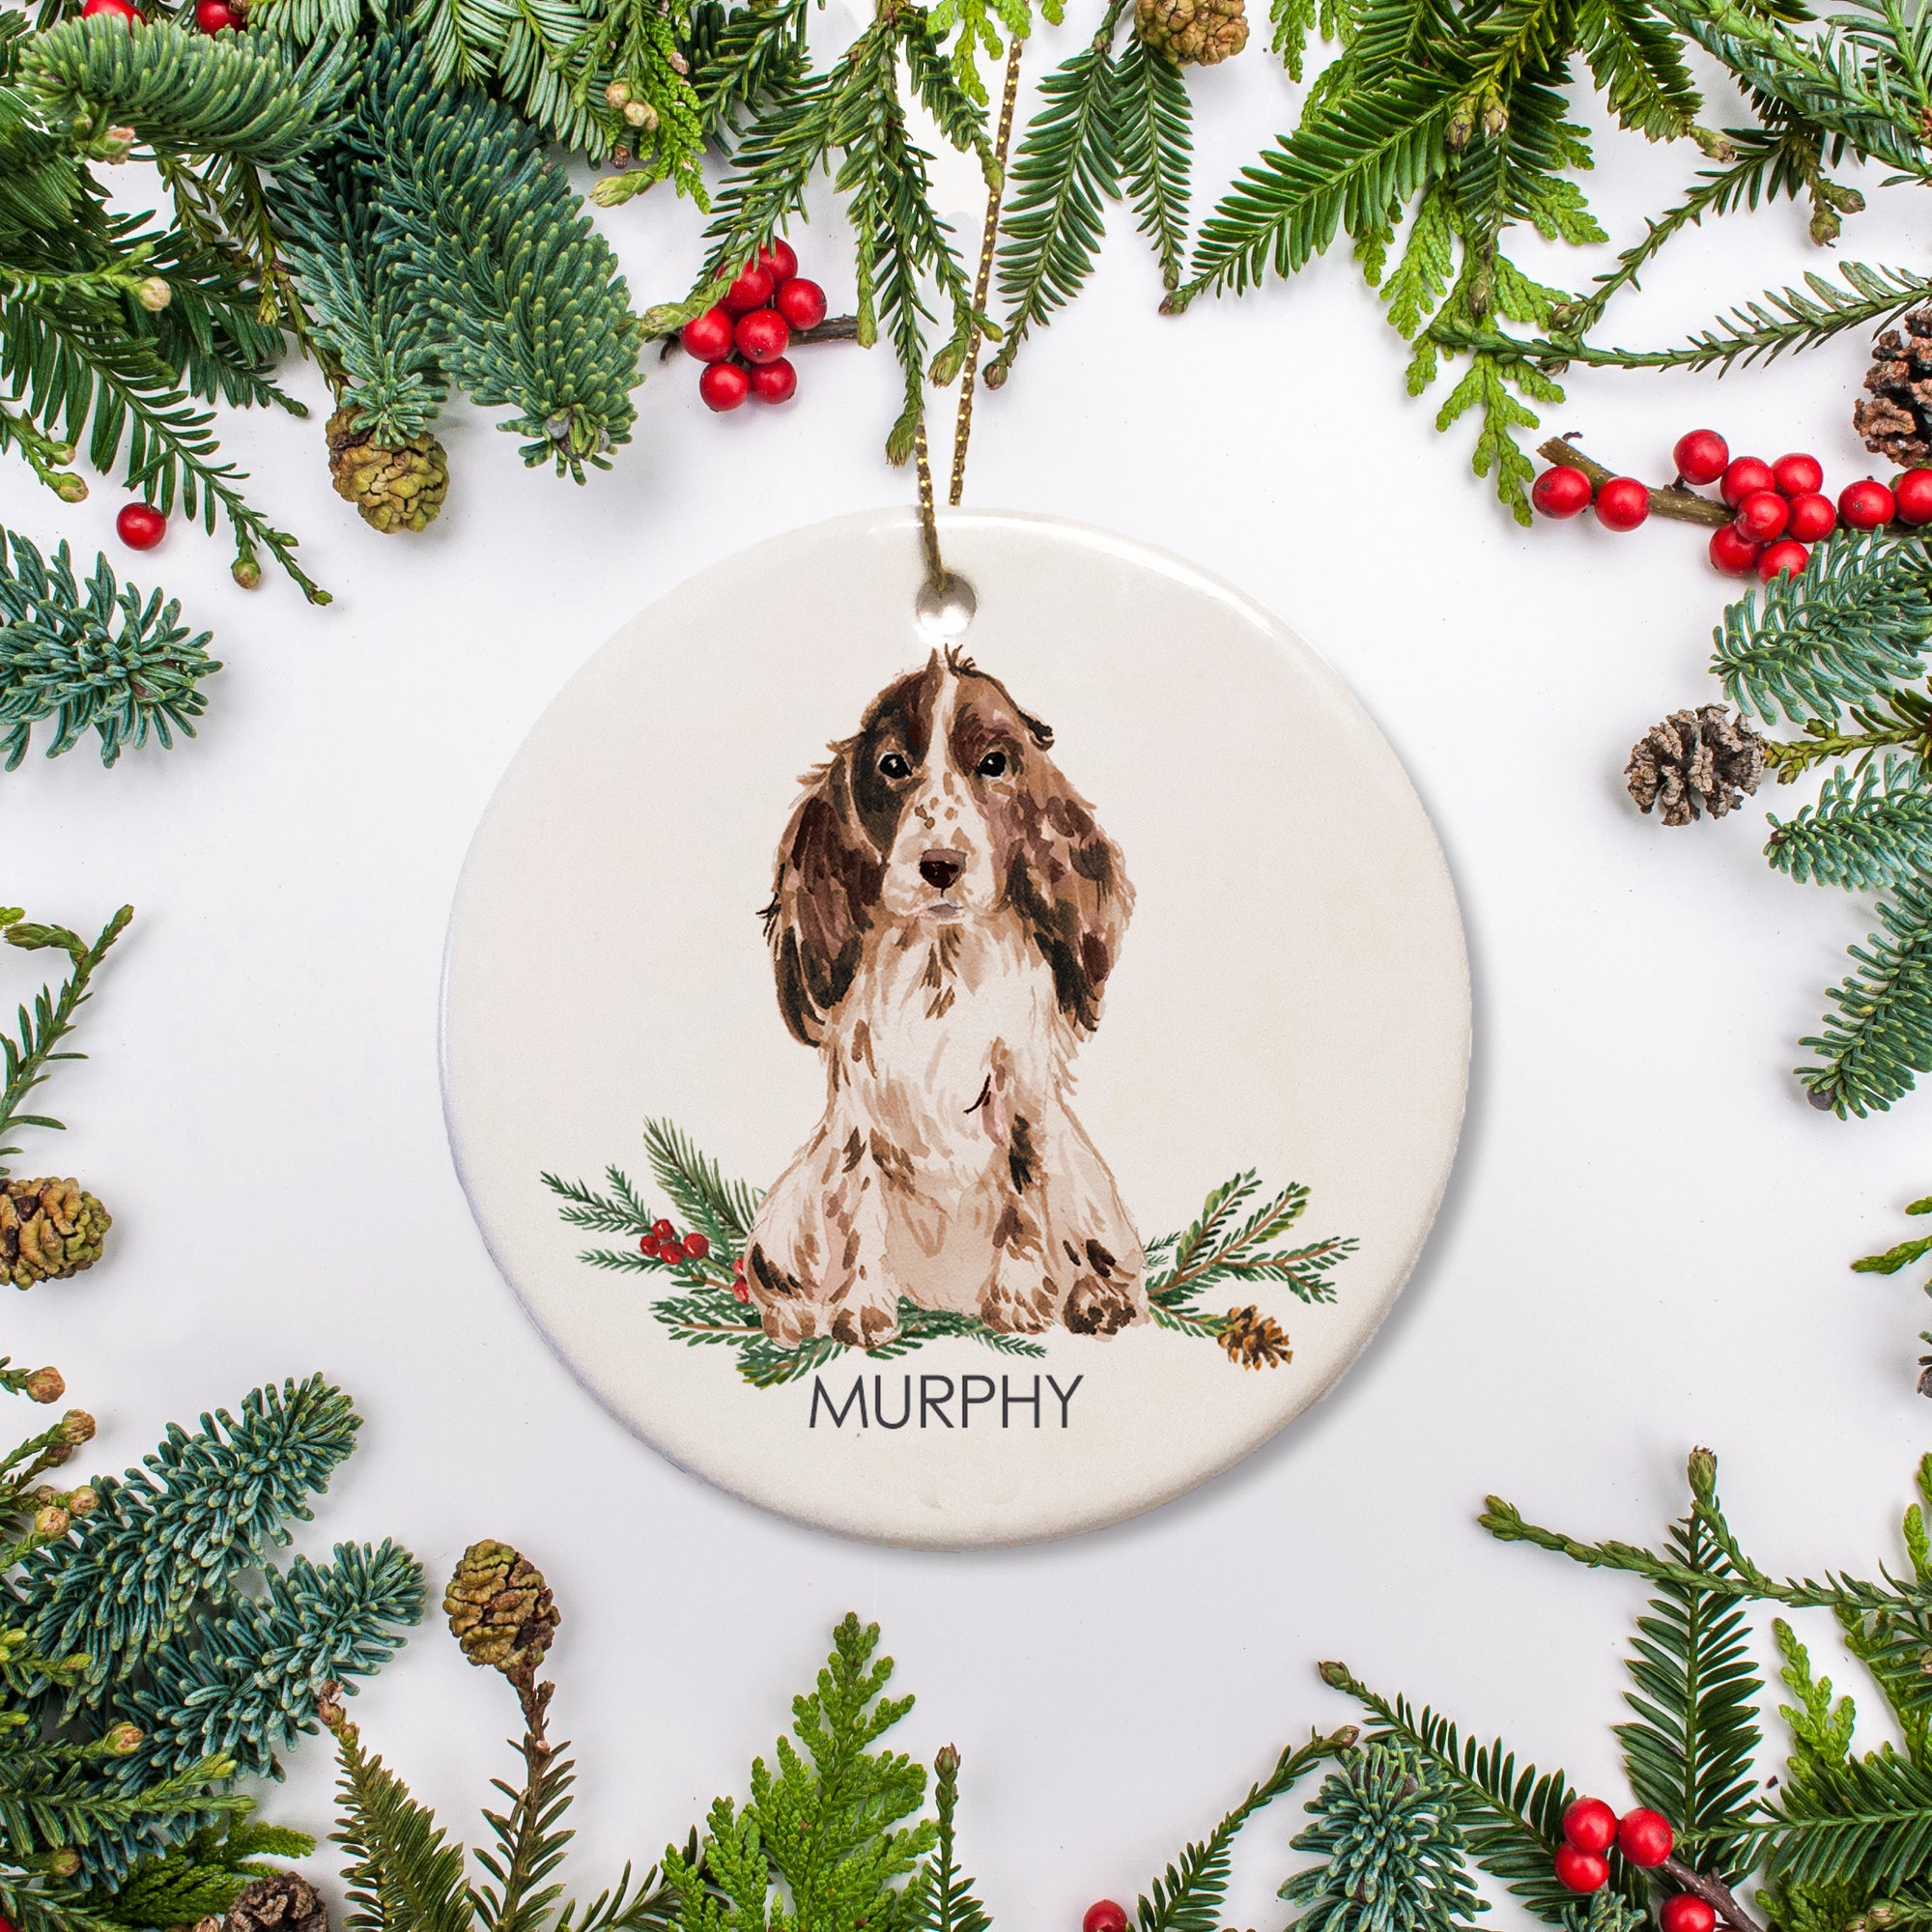 This personalized ornament features a brown Cocker Spaniel, personalized with your dog's name. You can add a special text message to the back of the ornament (a year, adoption date, or special quote). Makes a great gift!